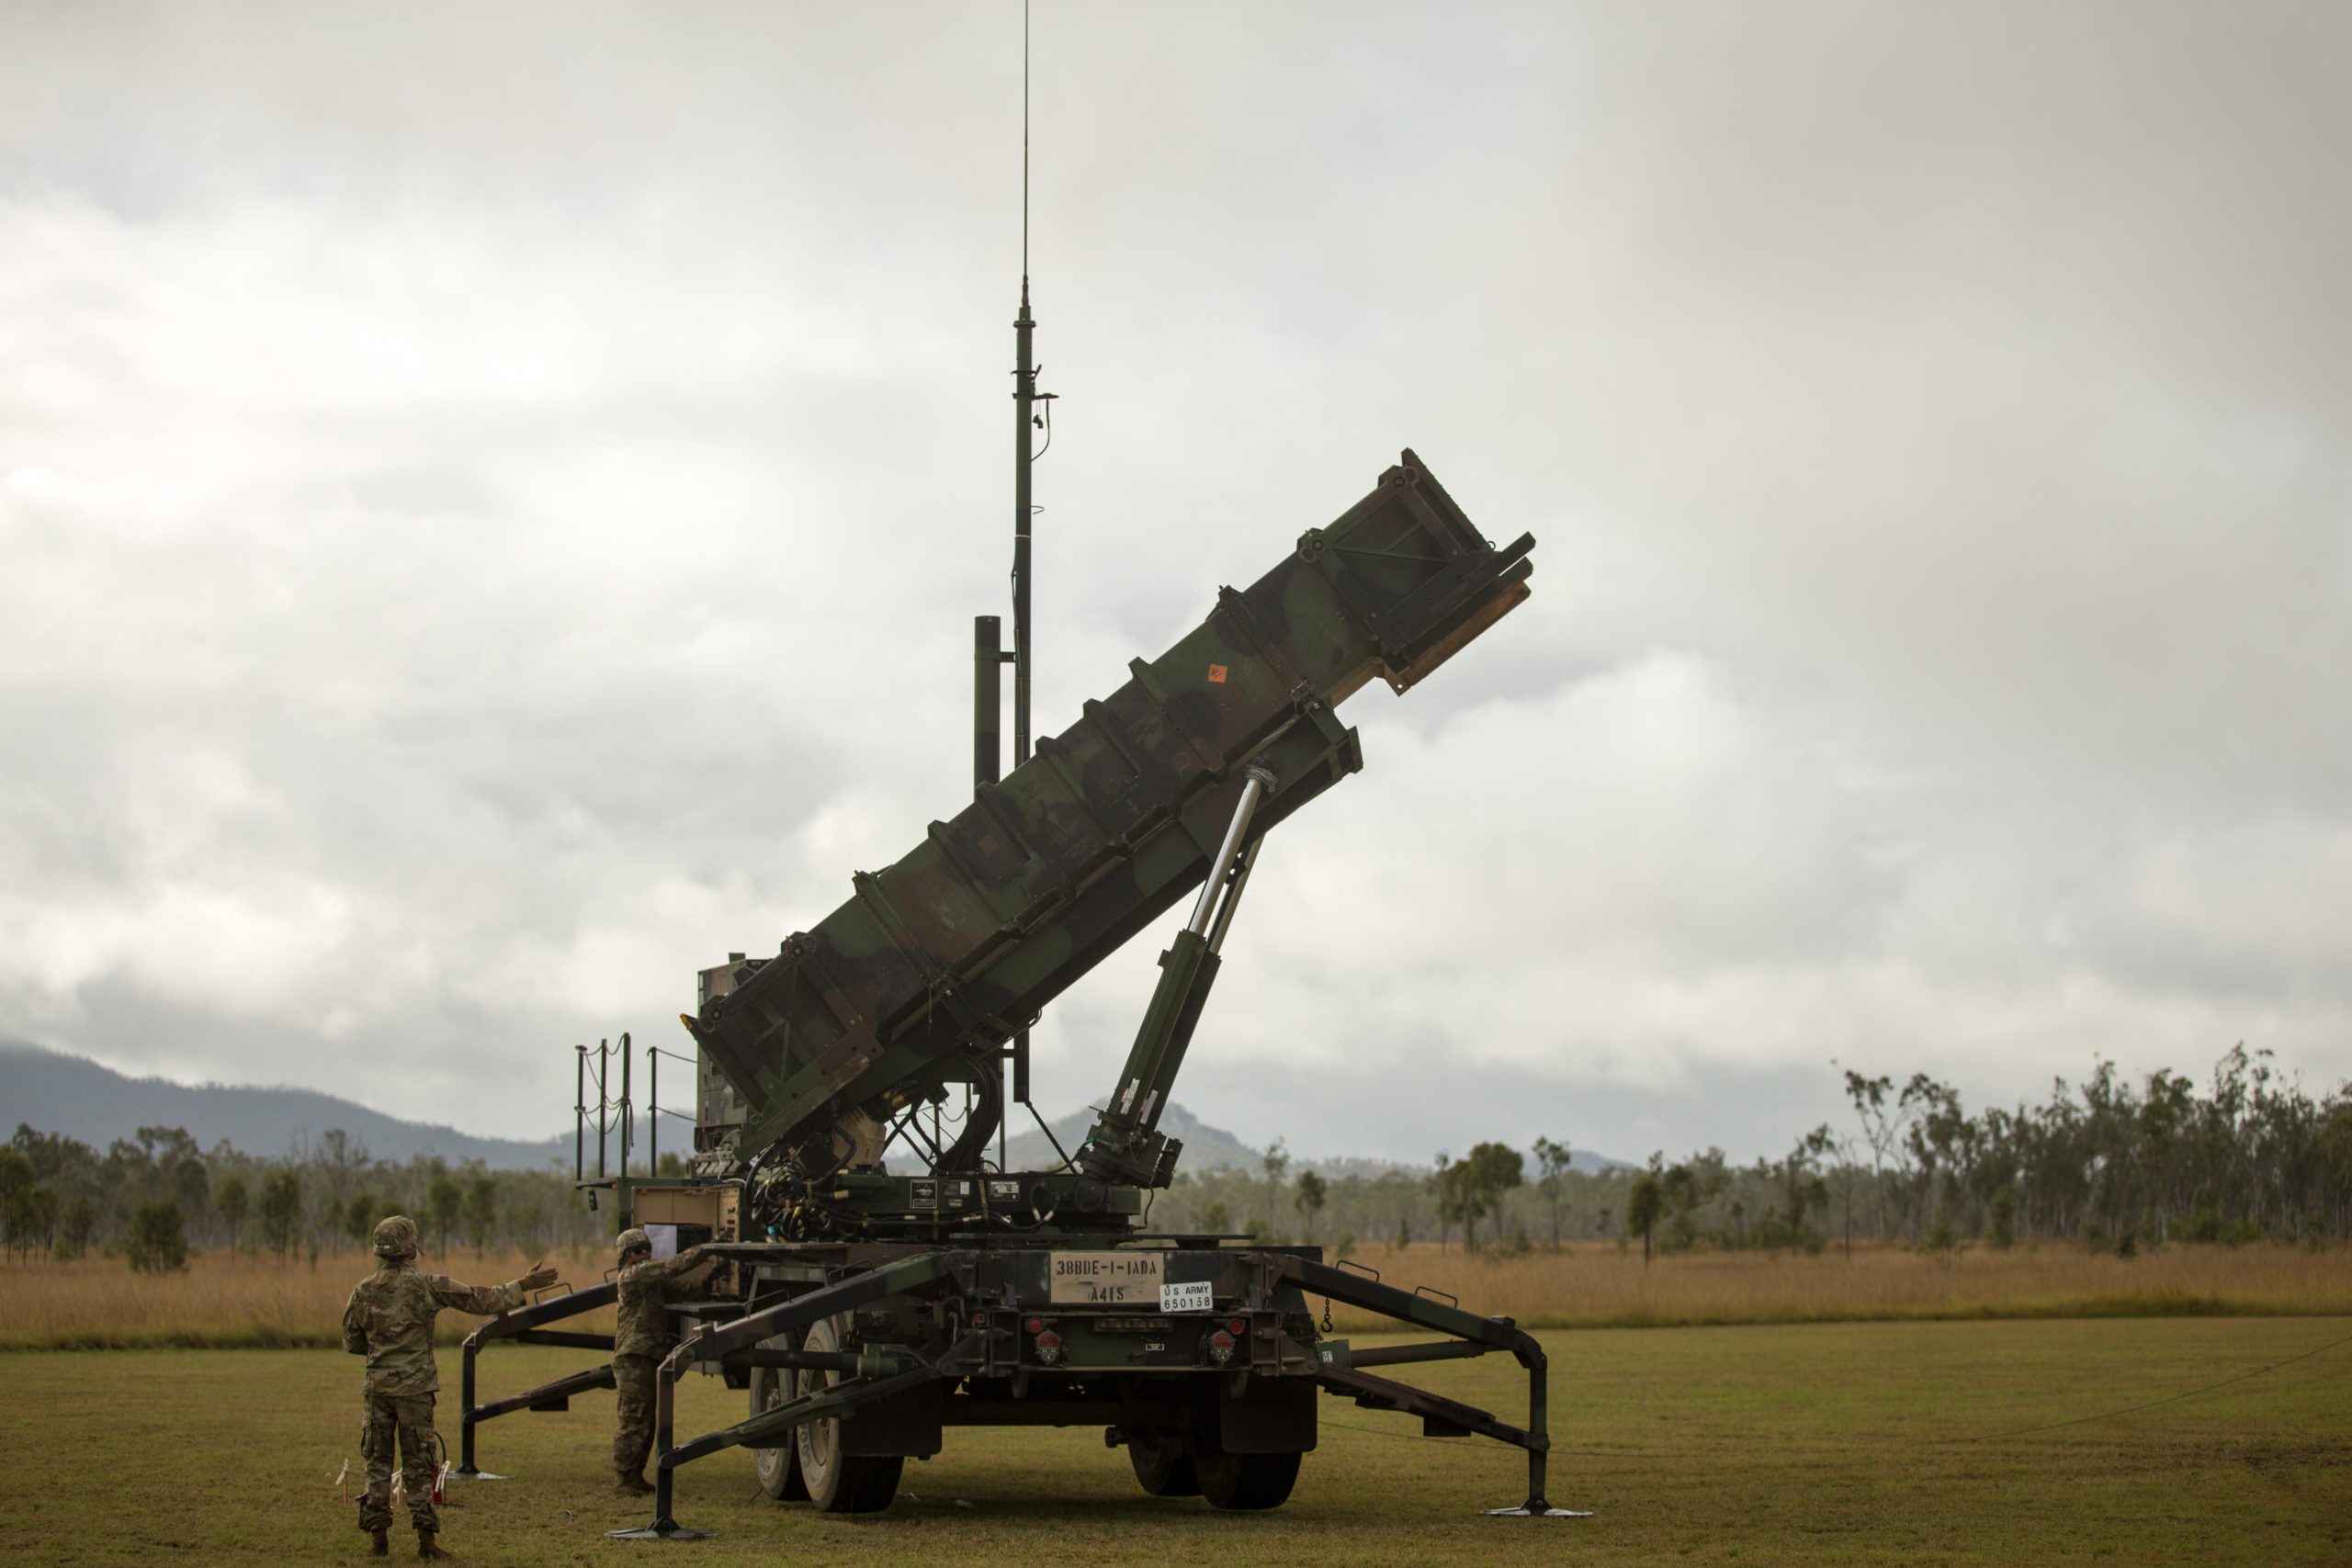 Photo: U.S. Army Sgt. Tamayo Ezekiel (right) and U.S. Army Pfc. Colby McCormick (left), Army Patriot Launching Station Enhanced Operators, raise the MIM-104 Patriot launching station Jul. 14, 2021, at Camp Growl in Queensland, Australia, during Exercise Talisman Sabre 2021. Credit: U.S. Marine Corps photo by Lance Cpl. Alyssa Chuluda via dvids